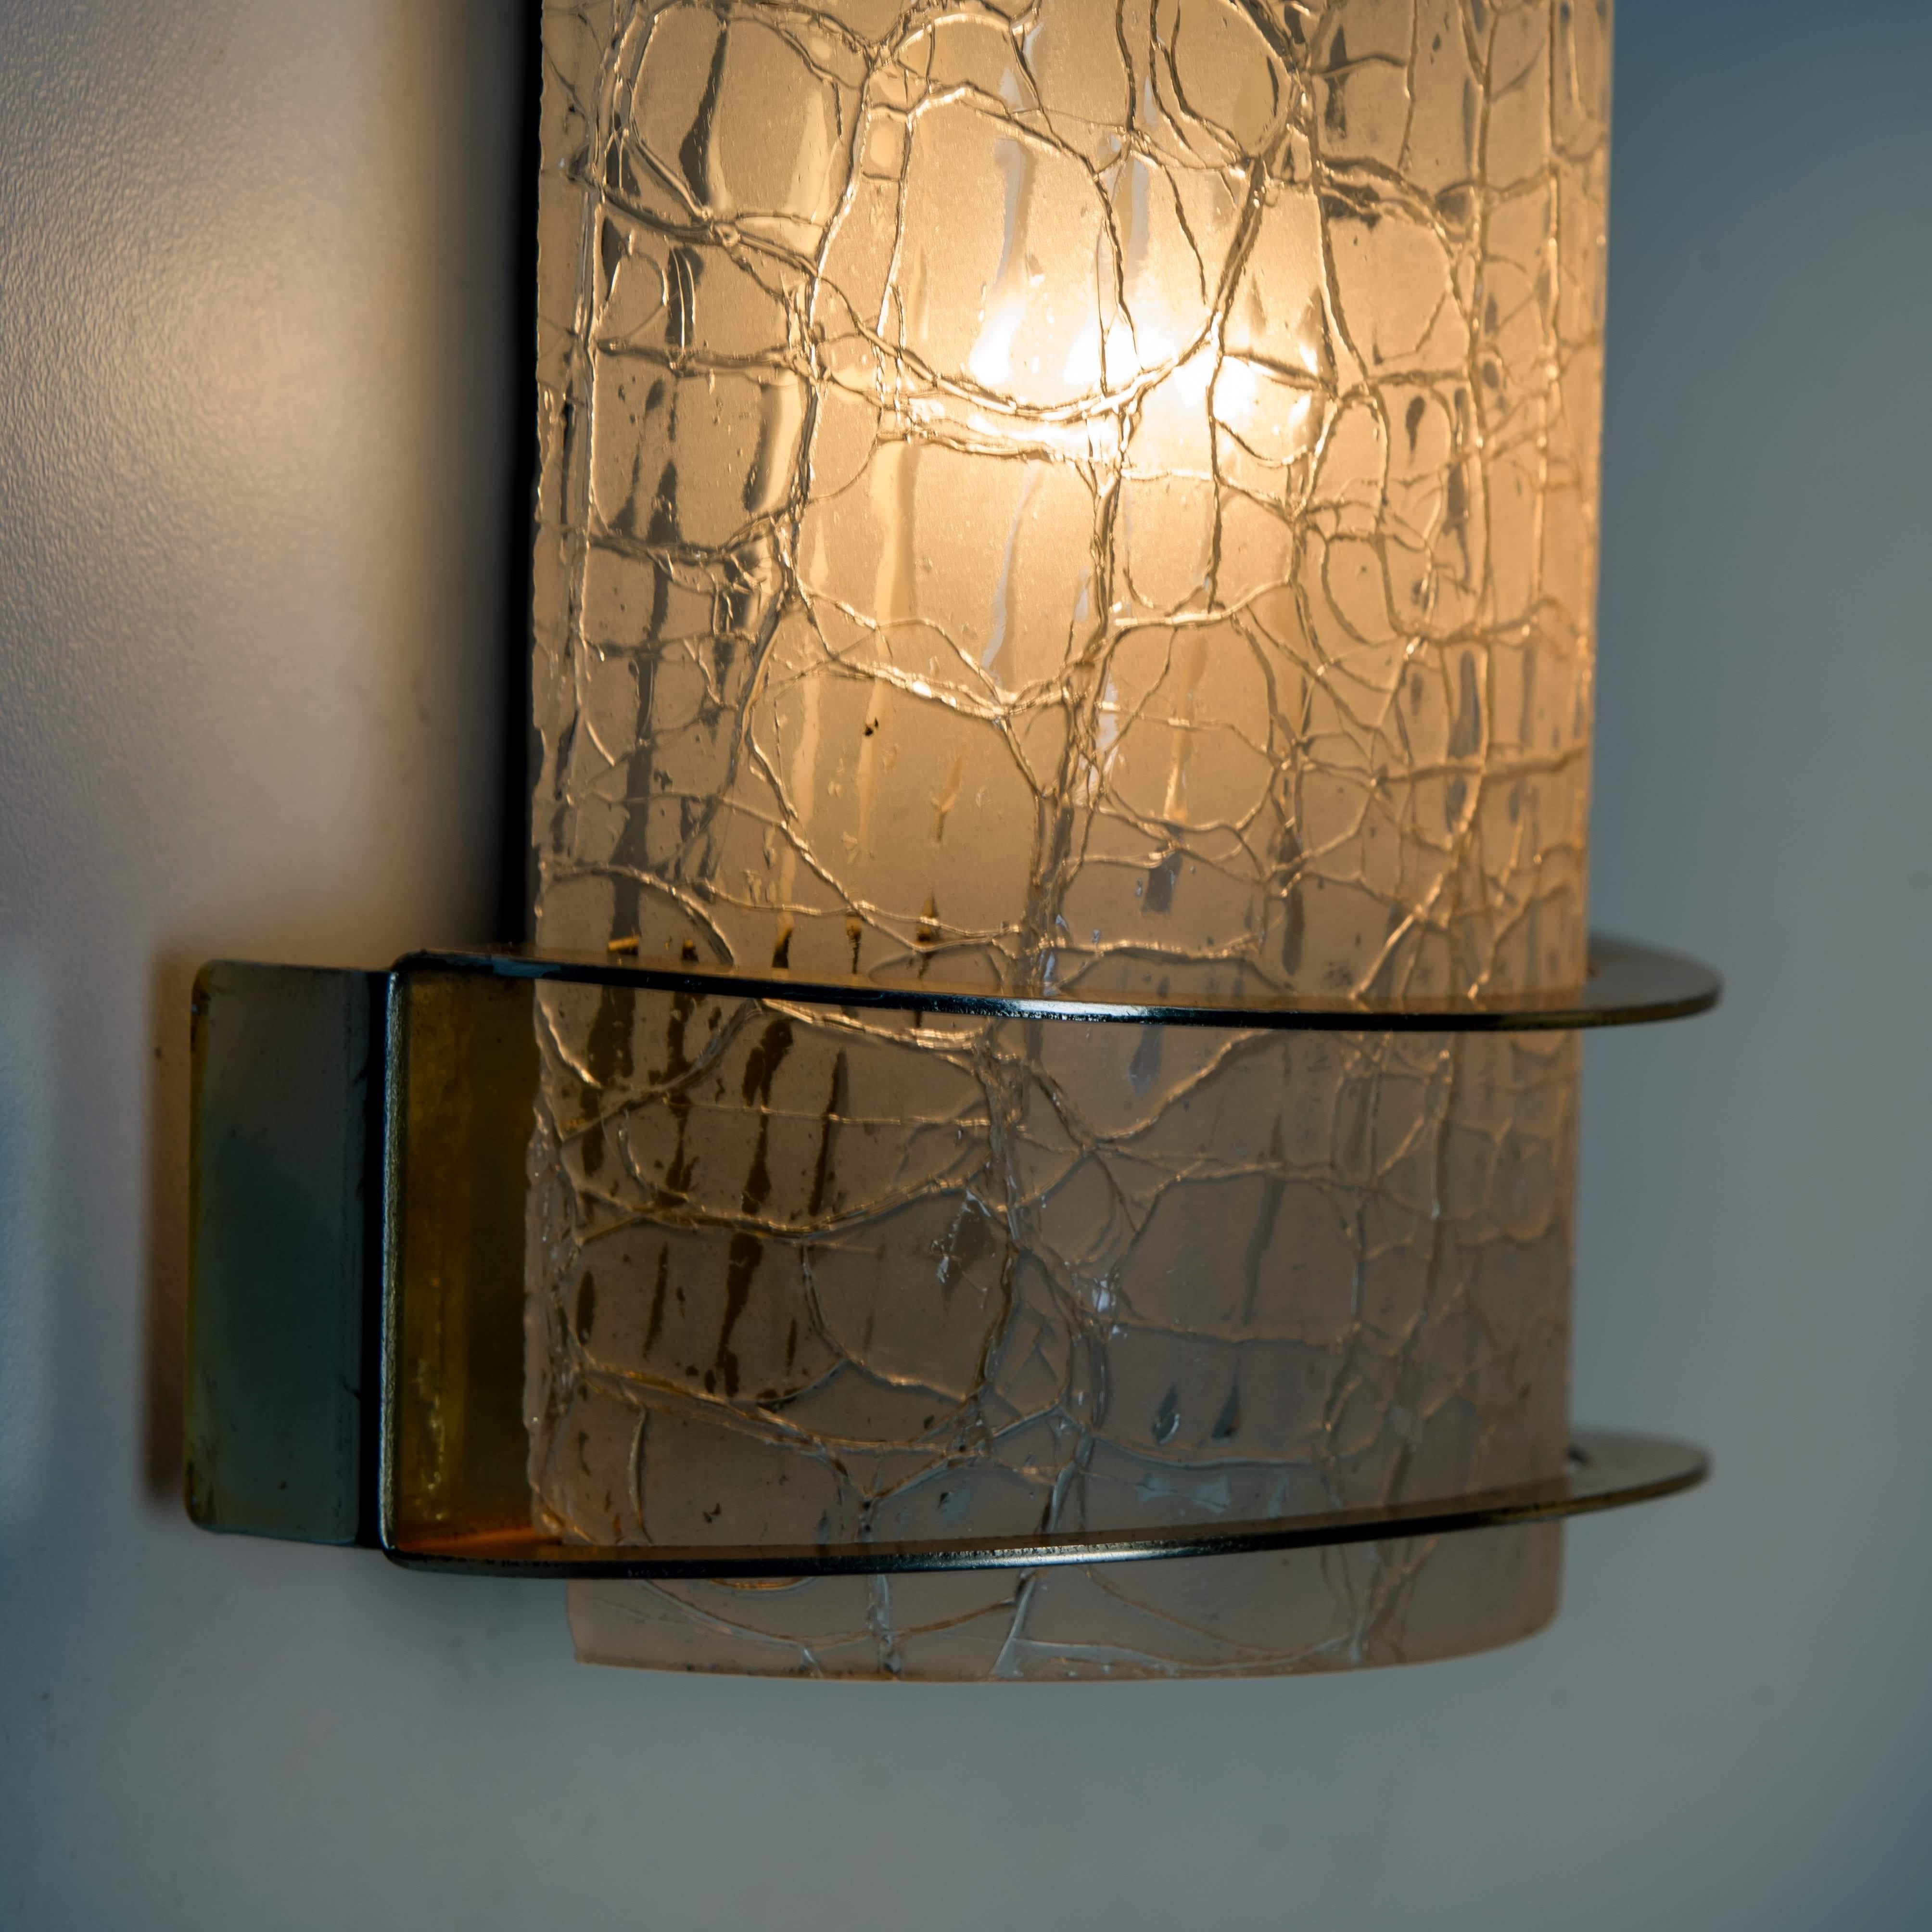 Clean lines to complement all decors. A wonderful high-end Hillebrand wall light fixture with brass detail and crackle glass. Illuminates wonderful

The wall sconce has a messing base and brass fittings with a white backplate which hold 1 E14